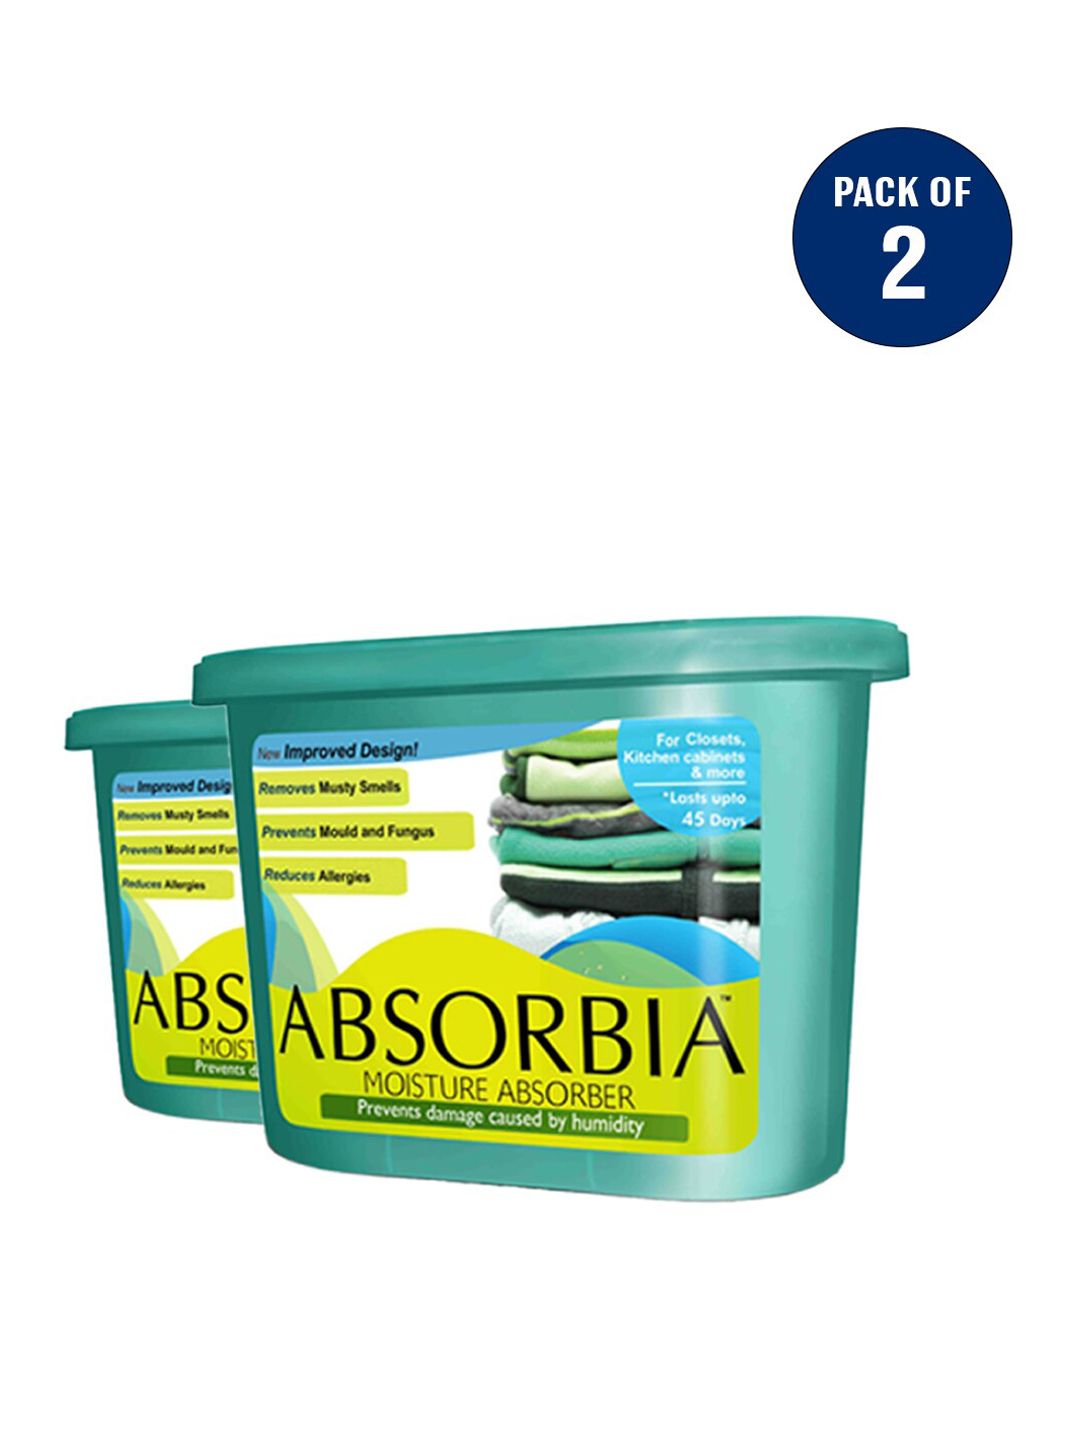 Absorbia Pack of 2 White Moisture Absorber Price in India